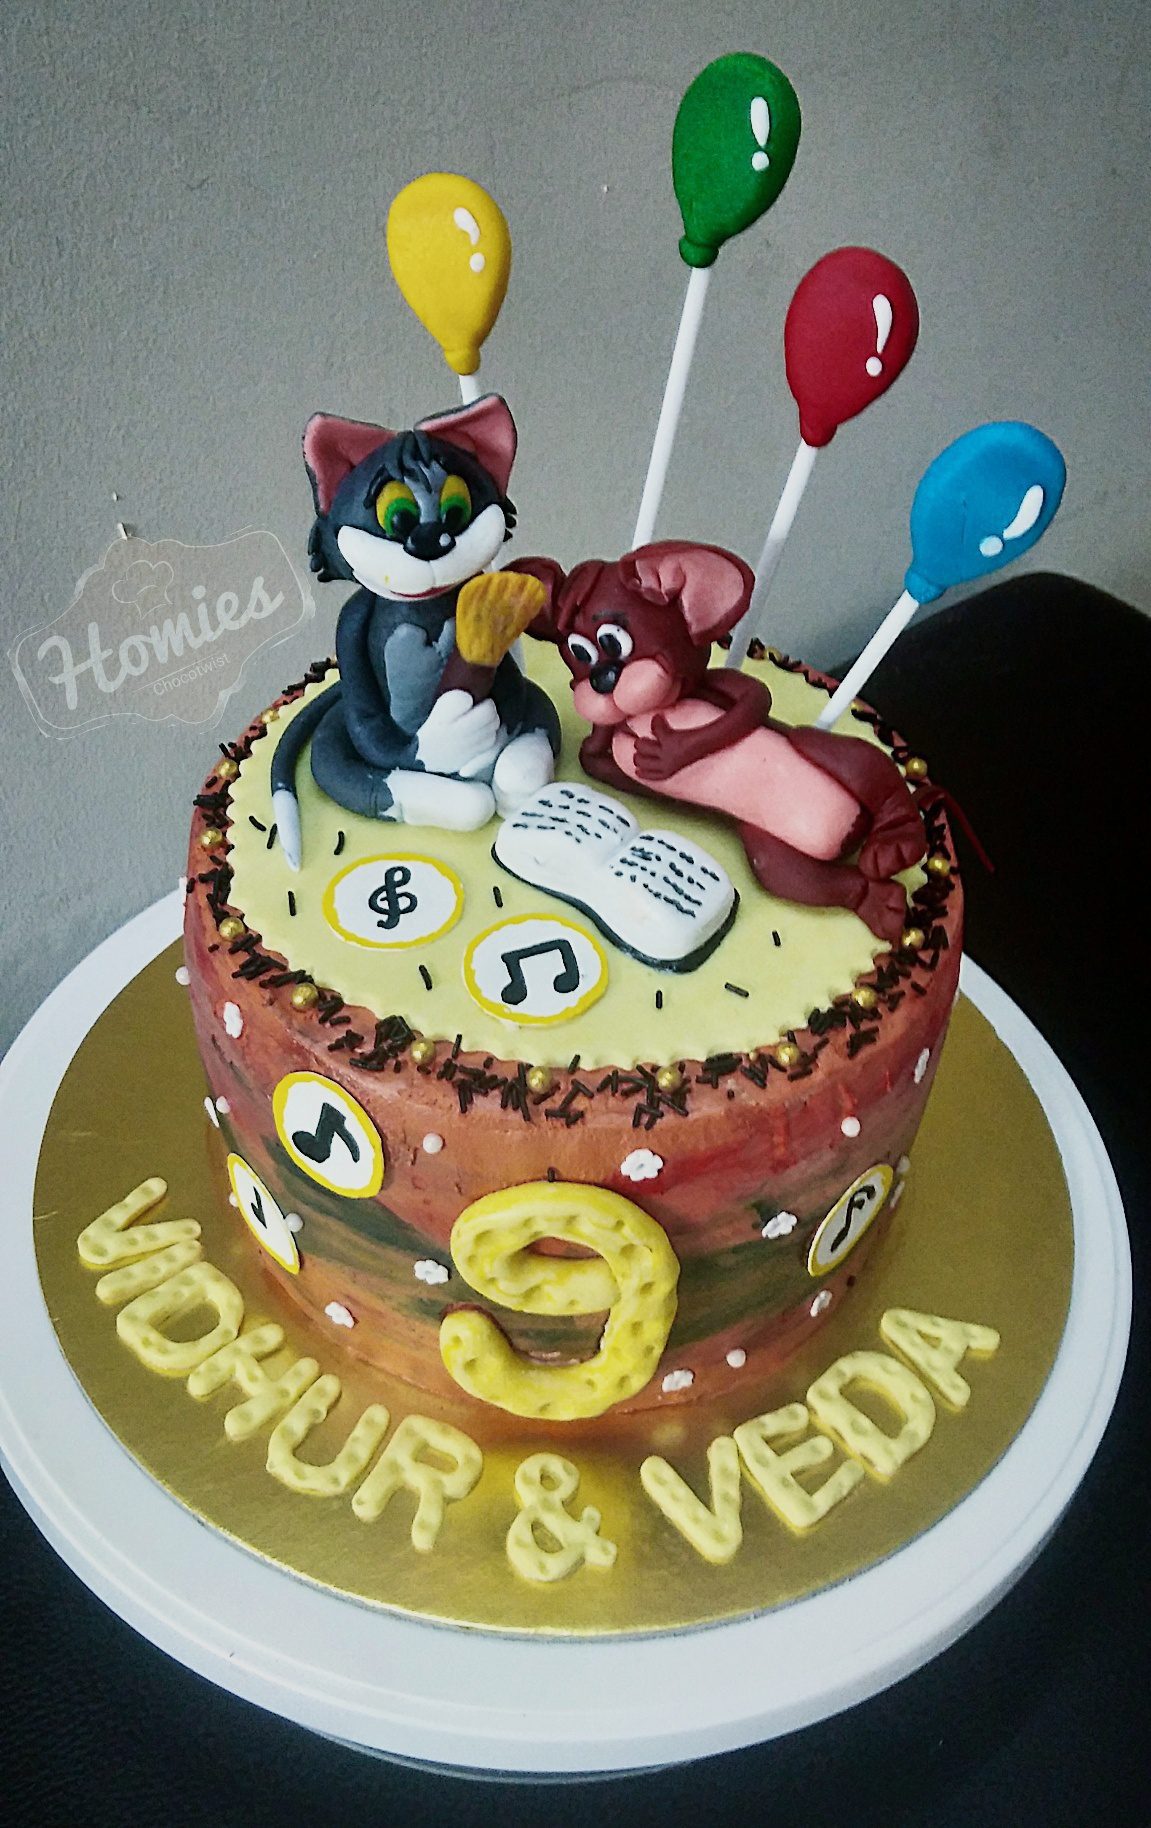 Best Tom and Jerry Theme Cake In Hyderabad | Order Online